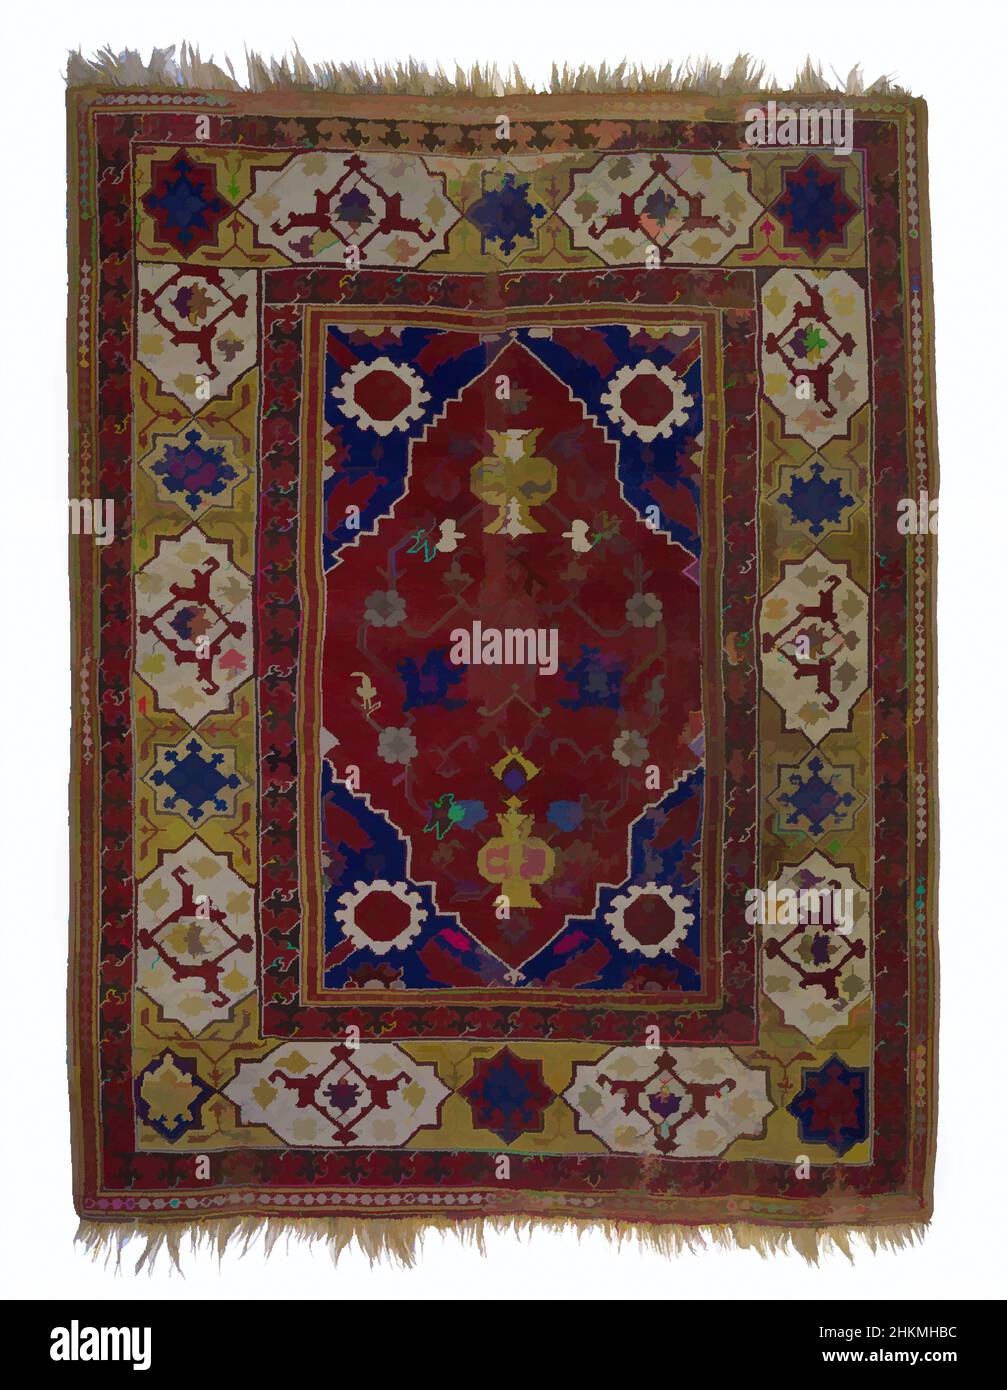 https://c8.alamy.com/comp/2HKMHBC/art-inspired-by-transylvanian-carpet-ottoman-period-1281-1924-late-17th-century-wool-made-in-anatolia-turkey-asia-coverings-hangings-textiles-63-x-49-in-160-x-1245-cm-classic-works-modernized-by-artotop-with-a-splash-of-modernity-shapes-color-and-value-eye-catching-visual-impact-on-art-emotions-through-freedom-of-artworks-in-a-contemporary-way-a-timeless-message-pursuing-a-wildly-creative-new-direction-artists-turning-to-the-digital-medium-and-creating-the-artotop-nft-2HKMHBC.jpg